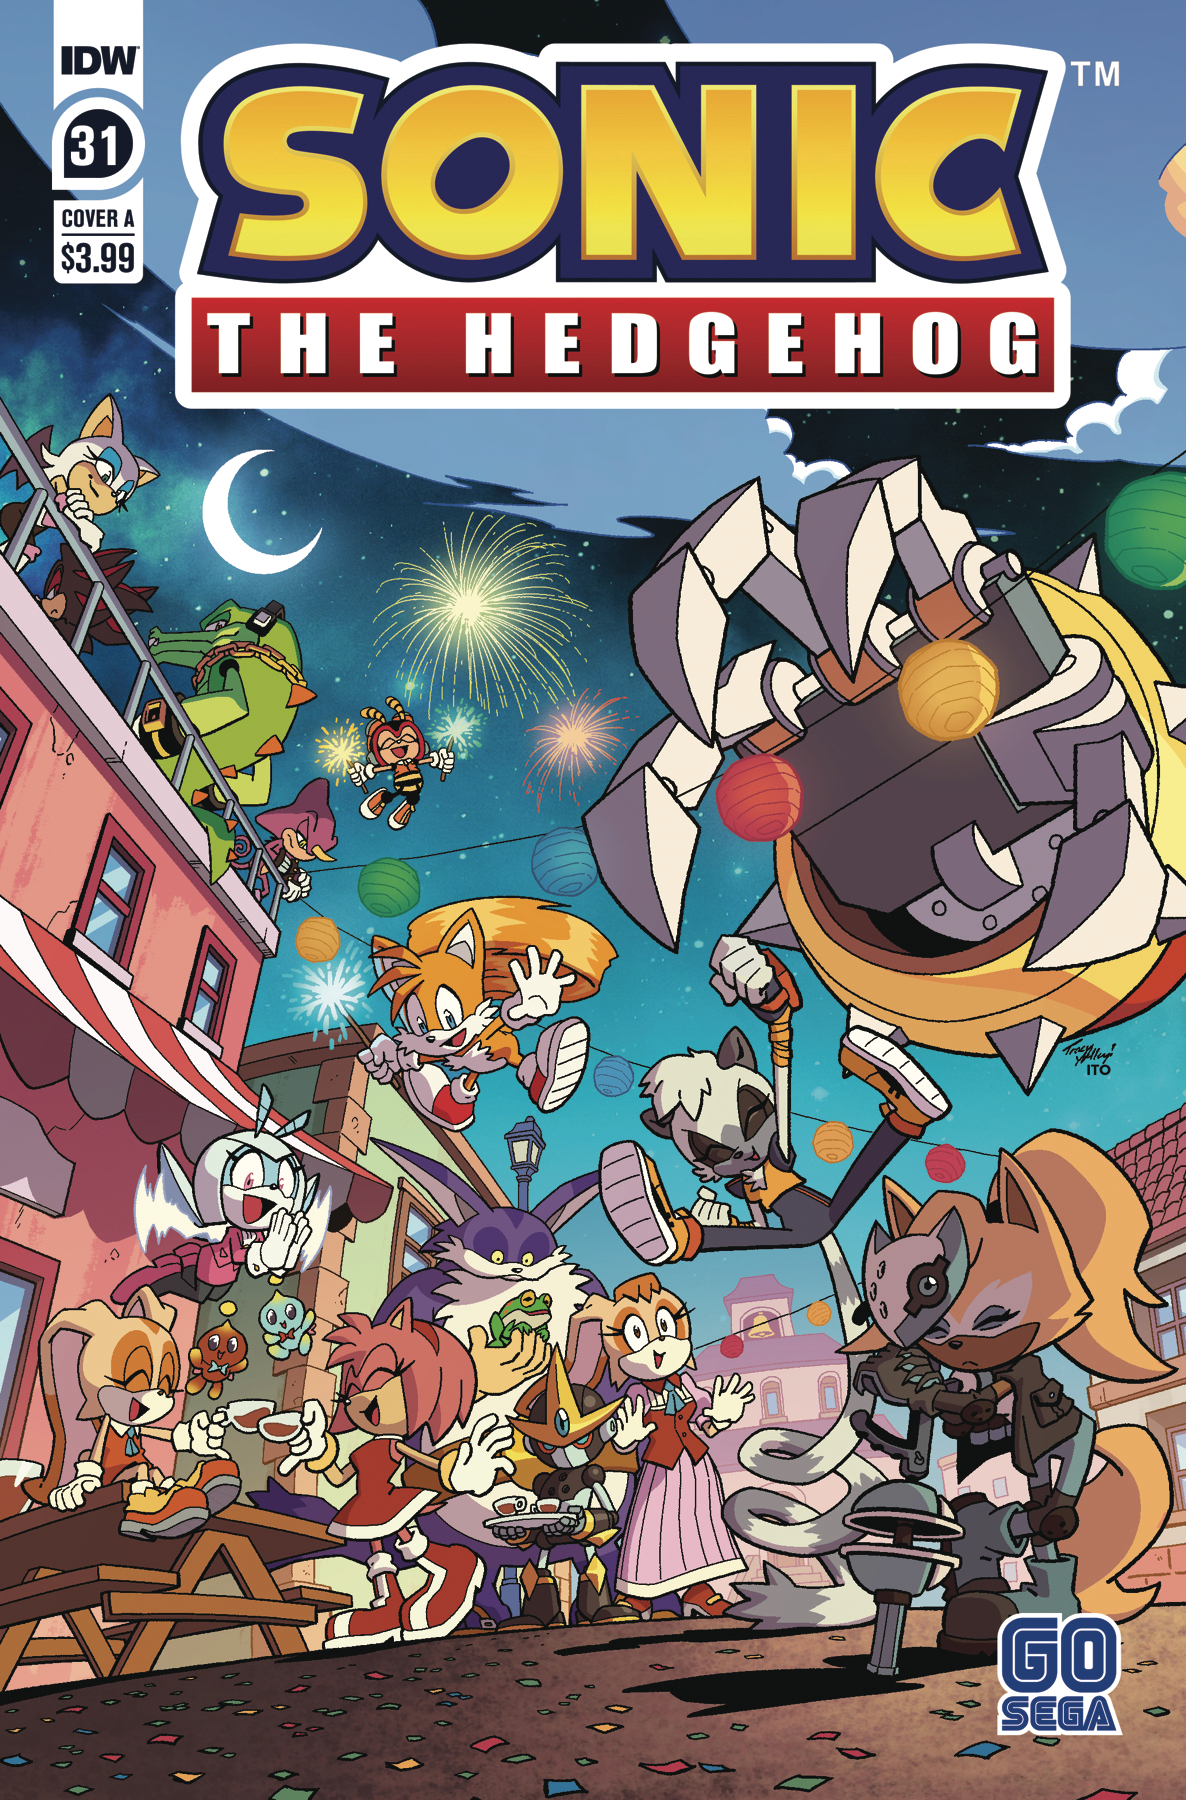 Sonic the Hedgehog #31 Cover A Yardley